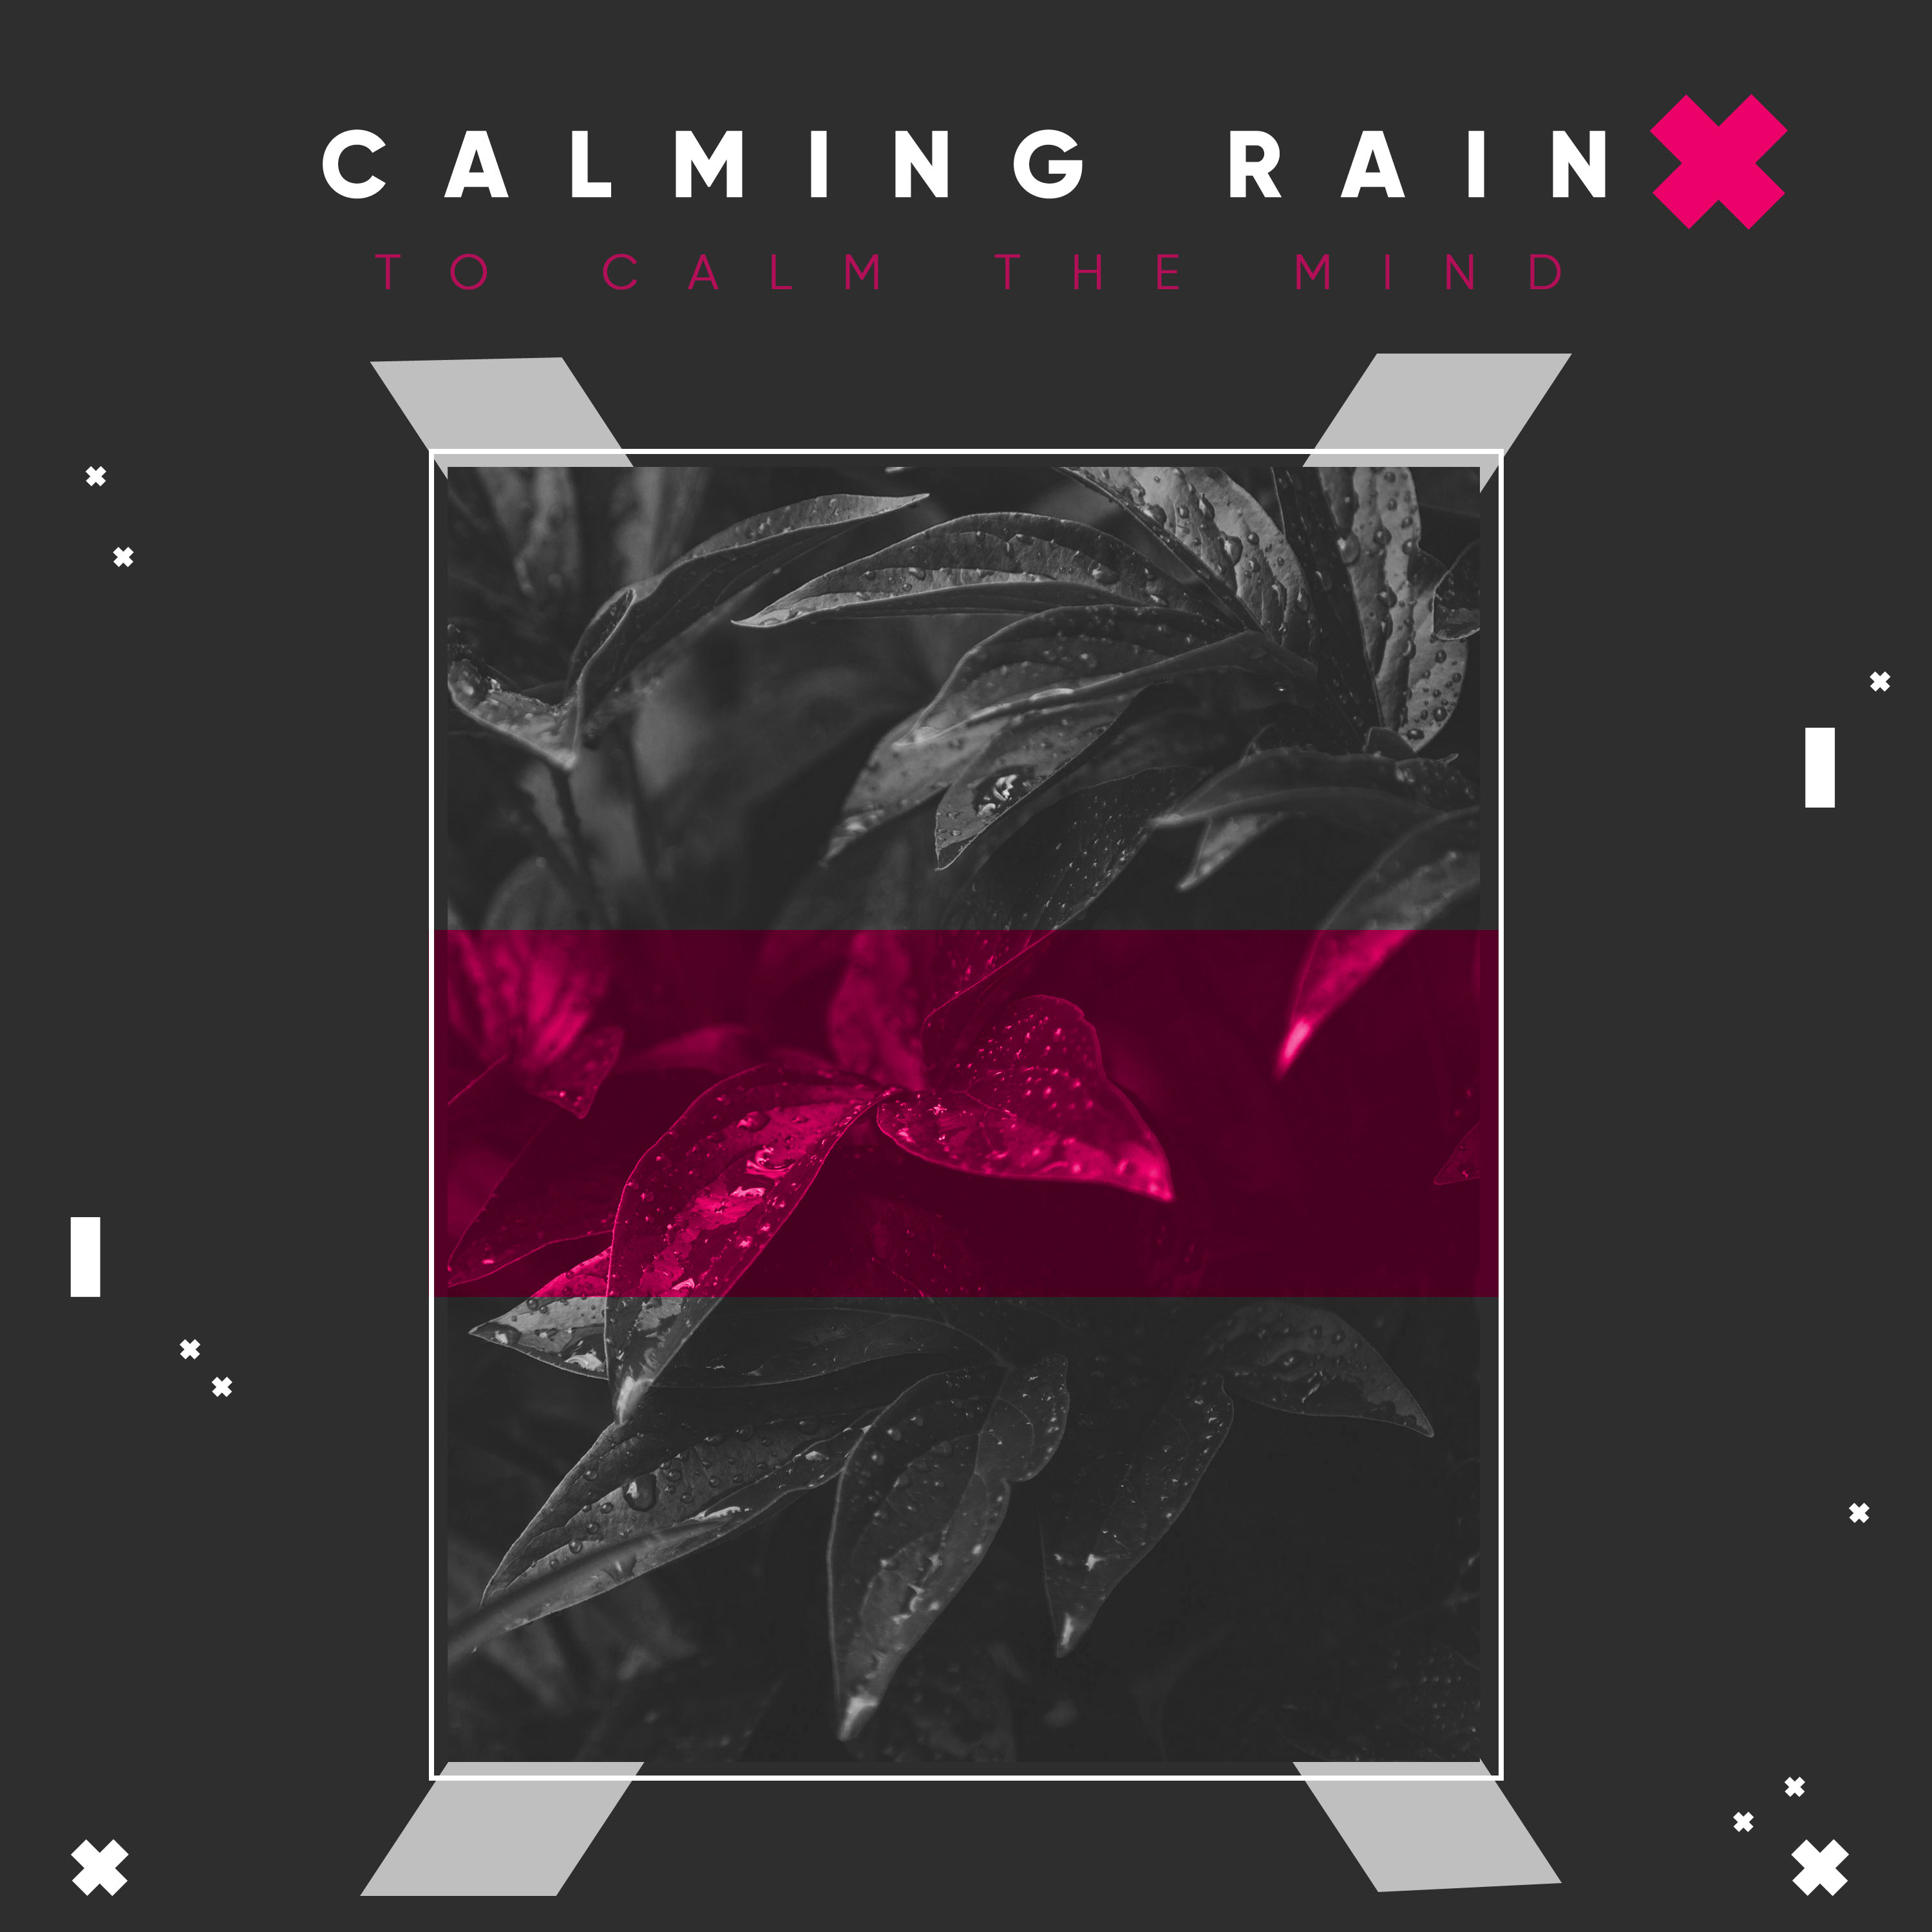 #16 Calming Rain Storms to Calm the Mind & Relax